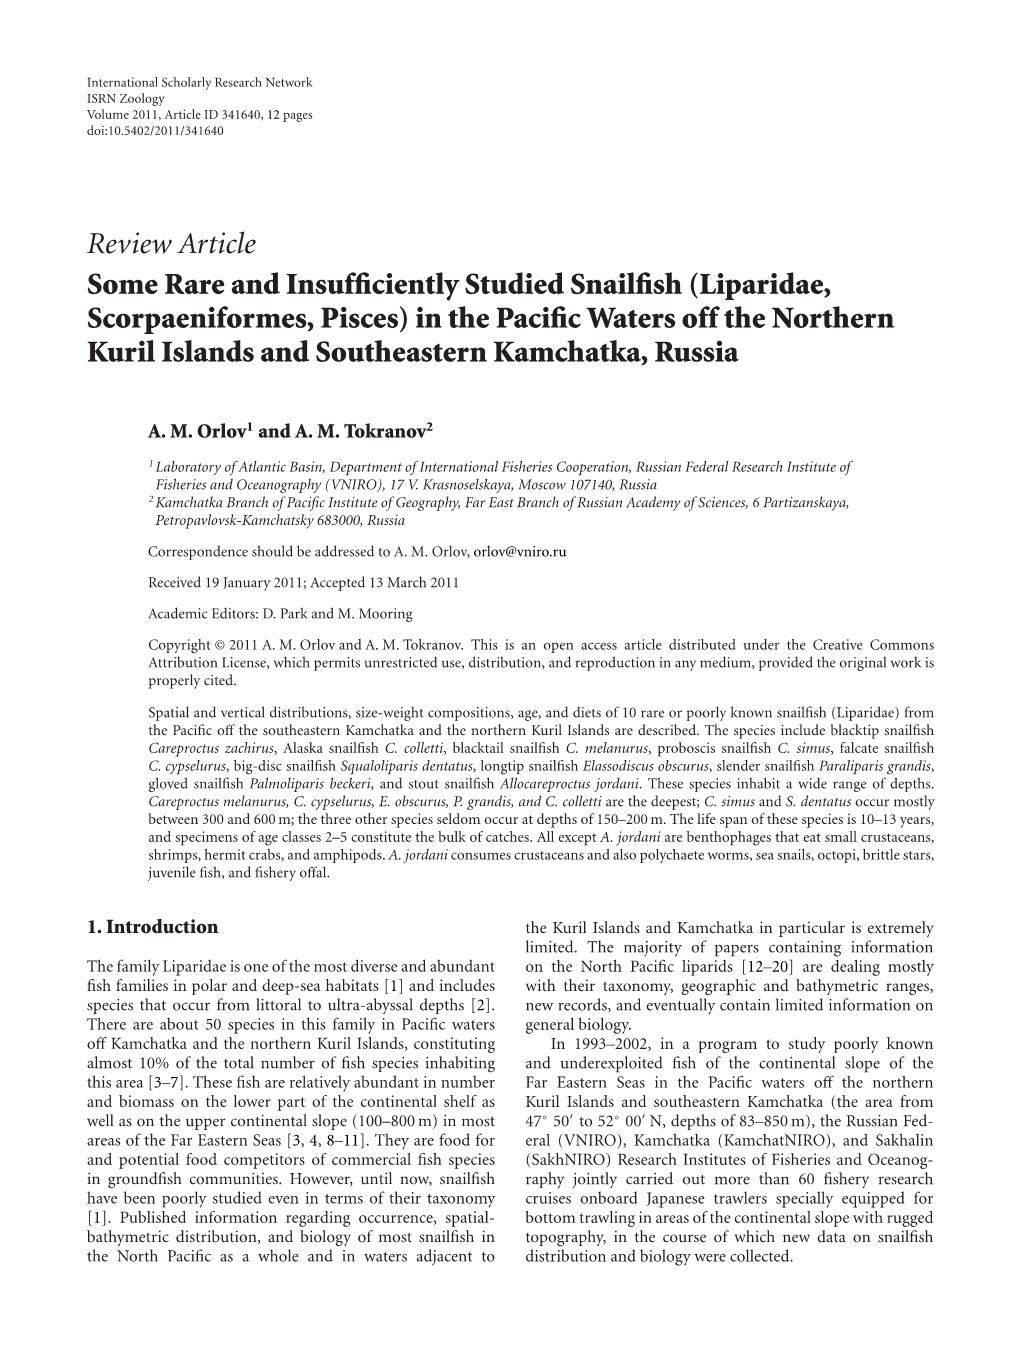 Some Rare and Insufficiently Studied Snailfish (Liparidae, Scorpaeniformes, Pisces) in the Pacific Waters Off the Northern Kuril Islands and Southeastern Kamchatka, Russia